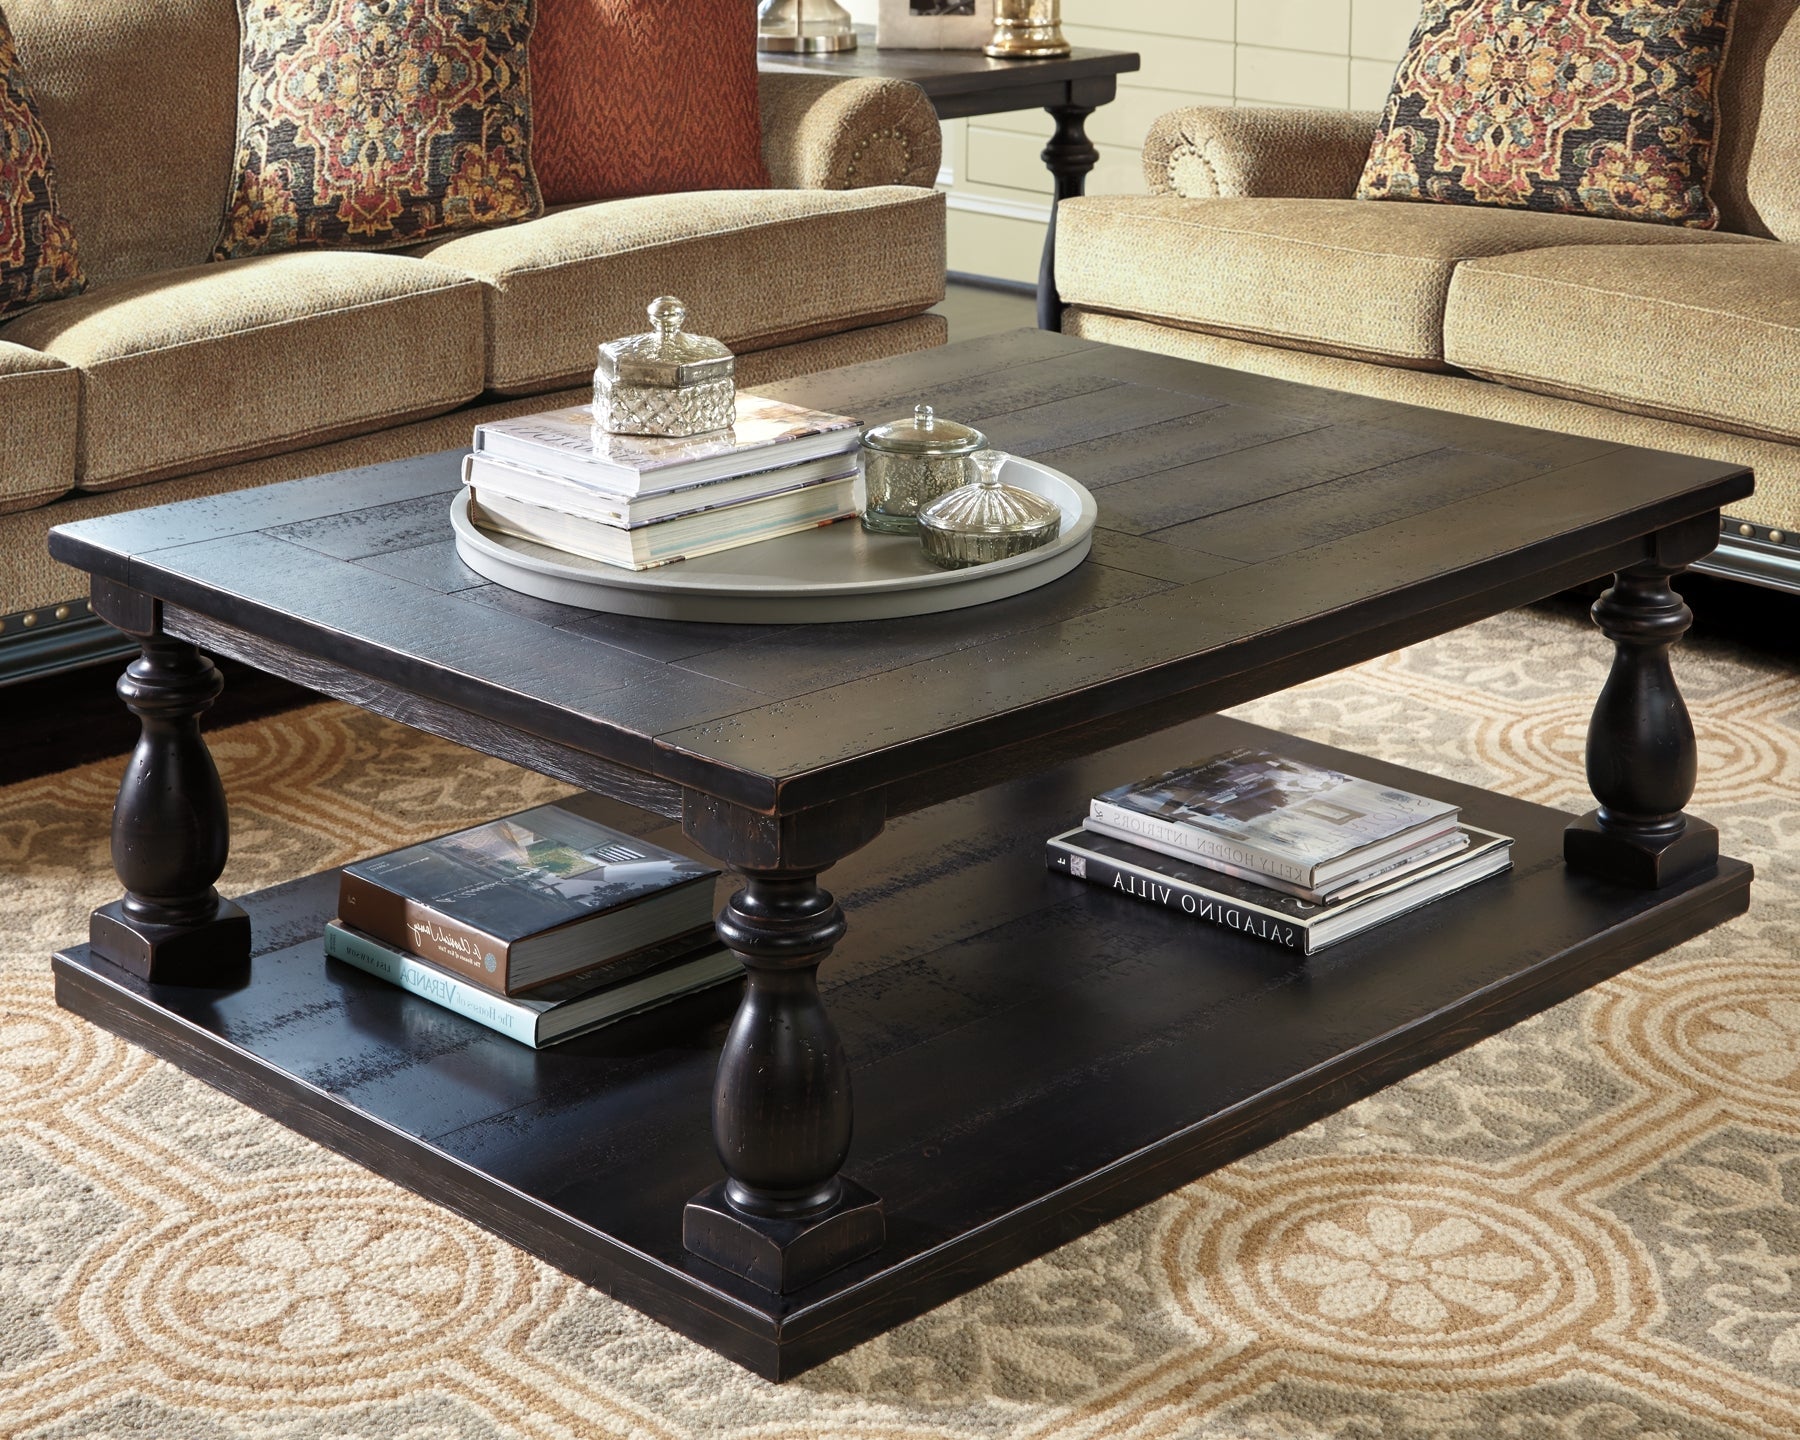 Mallacar Coffee Table with 2 End Tables Rent Wise Rent To Own Jacksonville, Florida